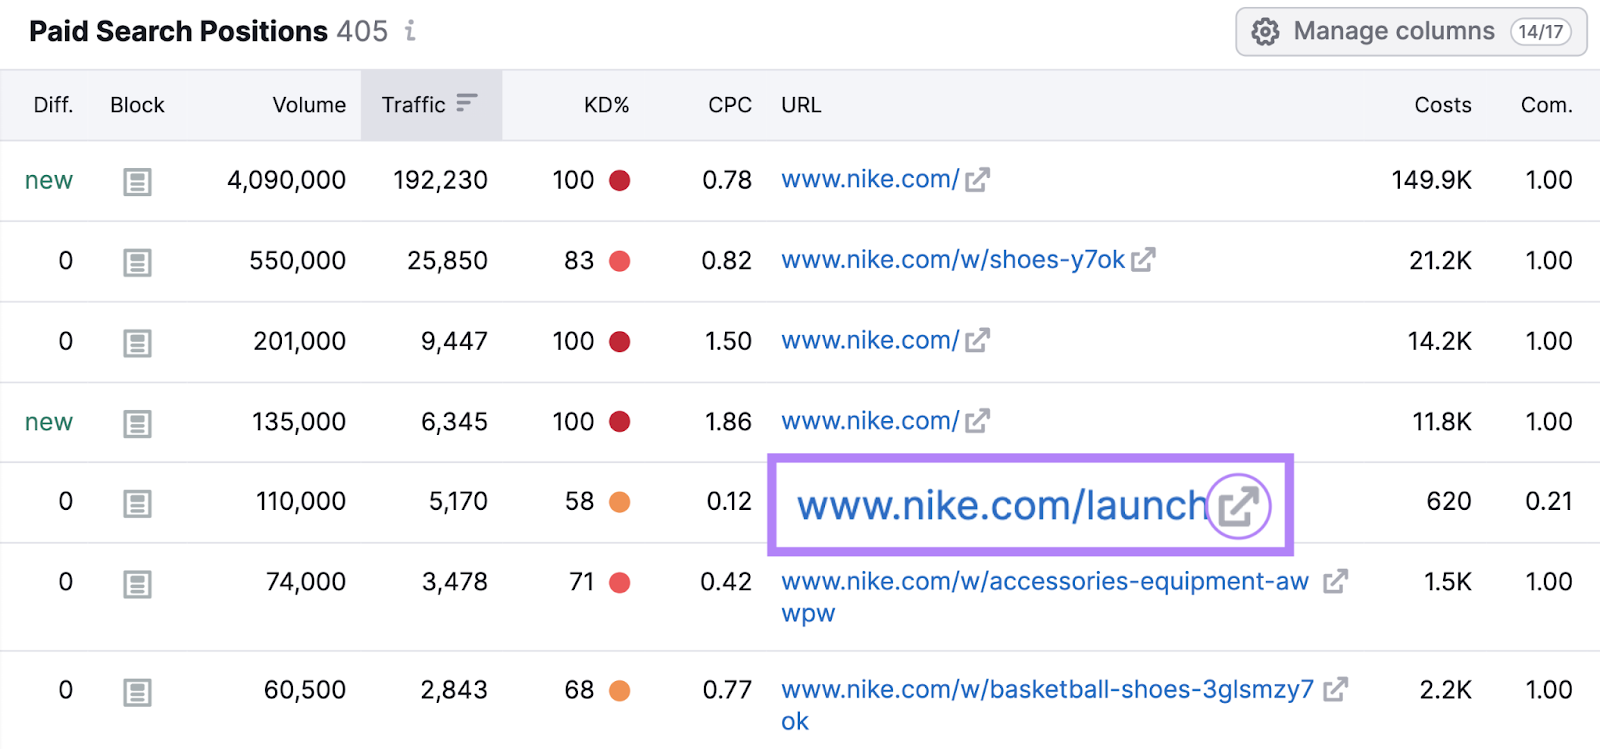 "www.nike.com/launch" result highlighted